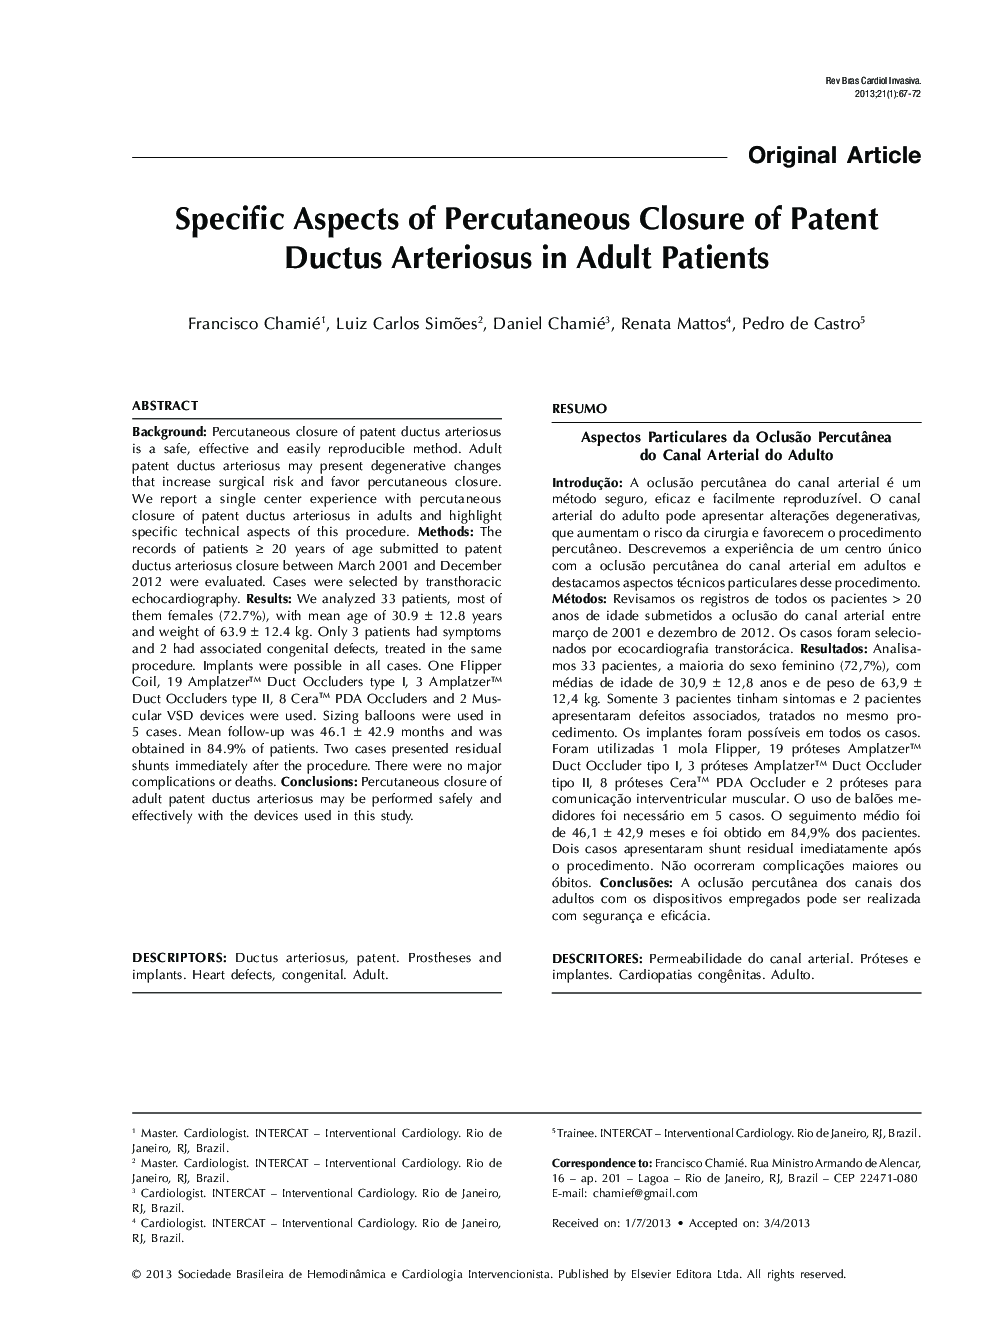 Specific Aspects of Percutaneous Closure of Patent Ductus Arteriosus in Adult Patients